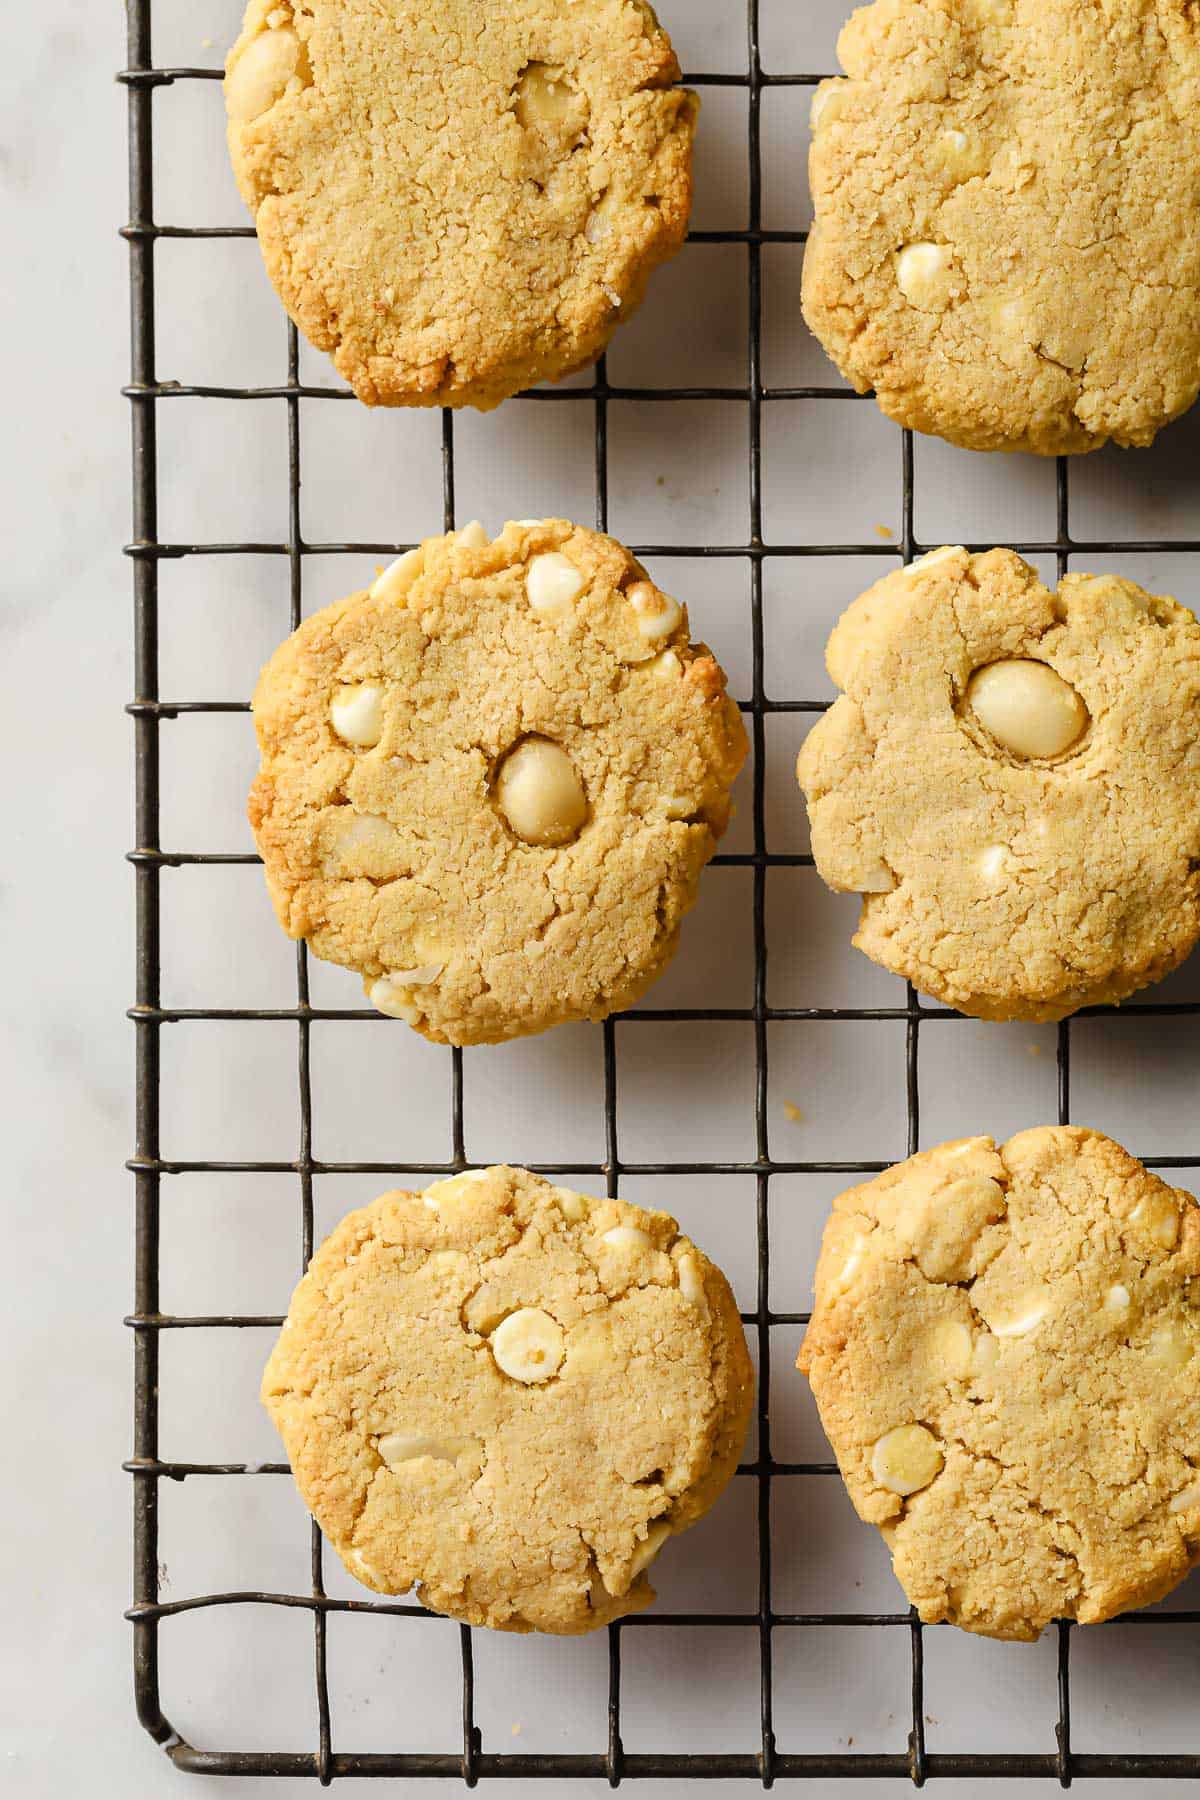 keto white chocolate macadamia nut cookies fresh out of the oven